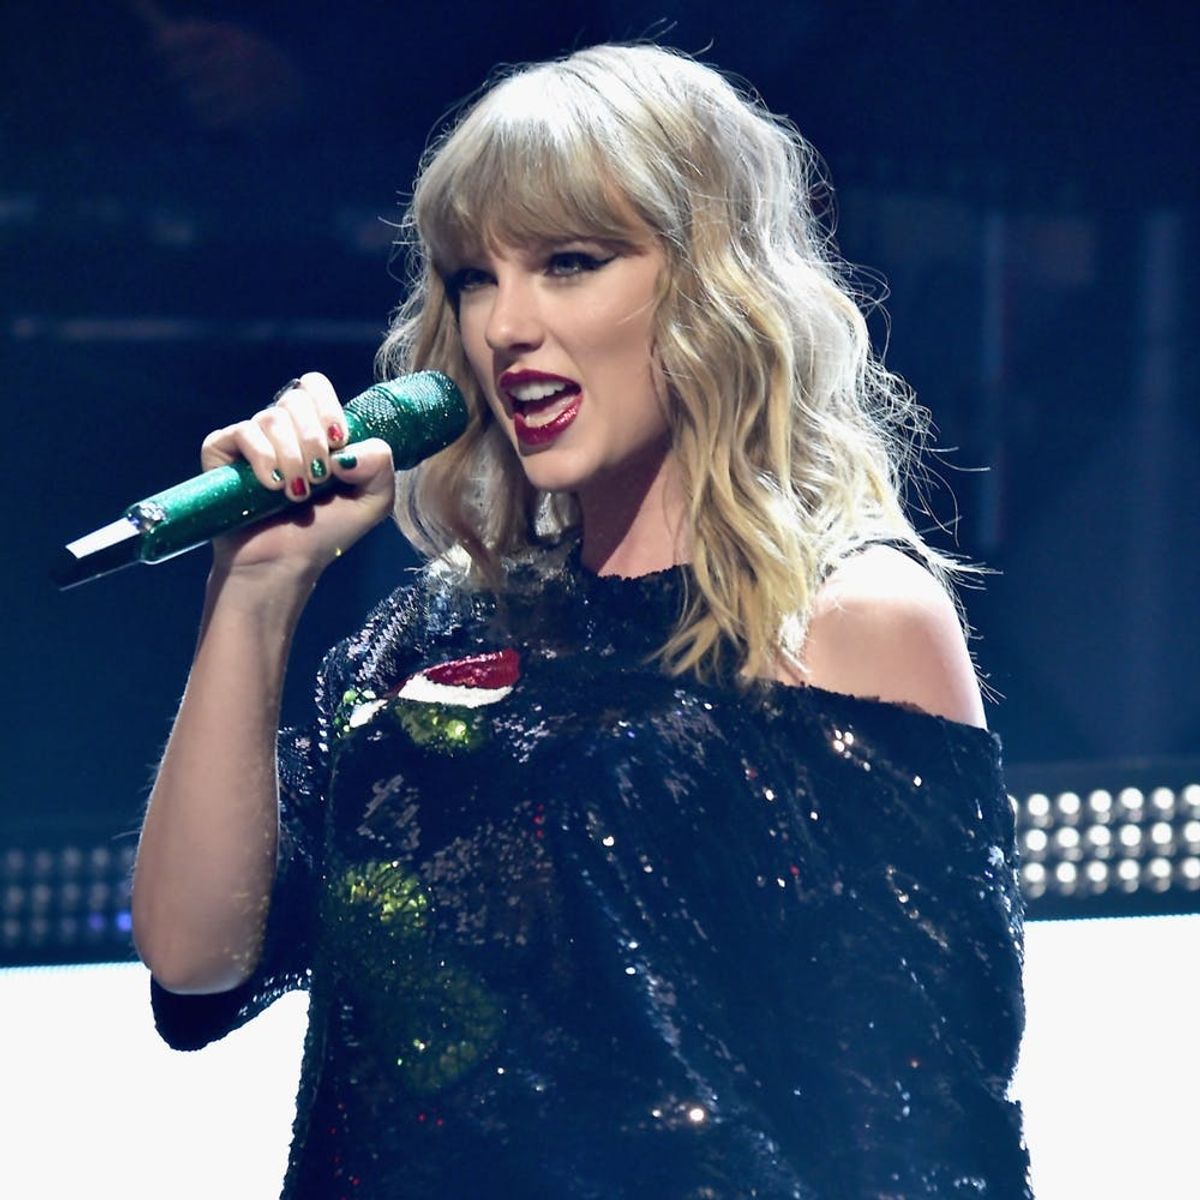 Taylor Swift and Joe Alwyn Were Spotted Dancing Together to Ed Sheeran and Fans Are Not Okay